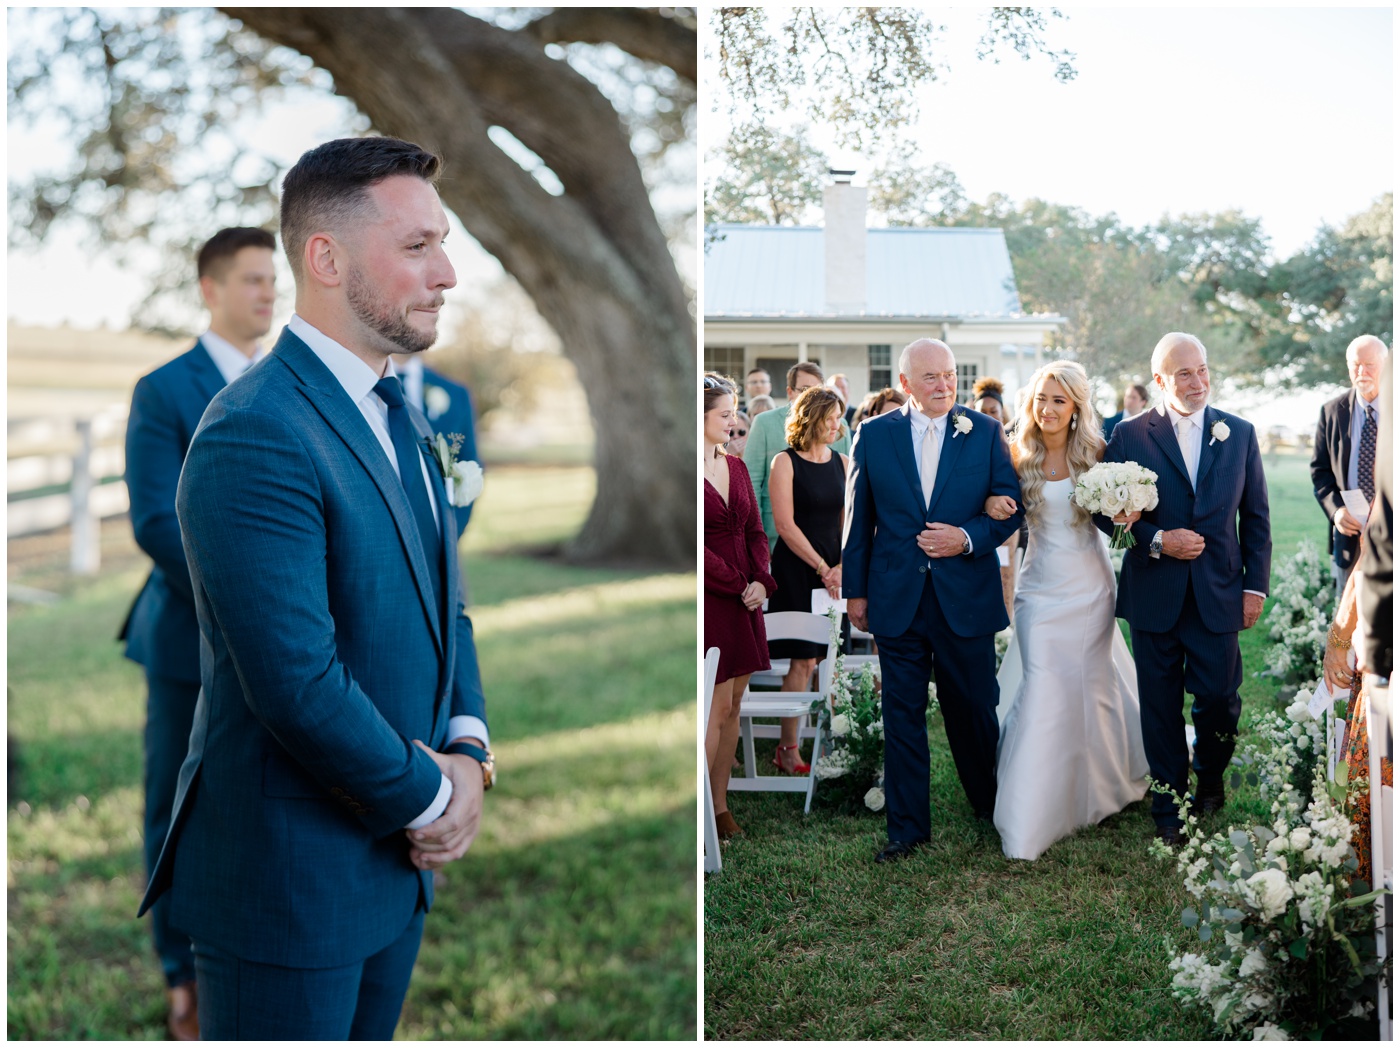 Houston wedding photographer | A bride walks down the aisle as her groom smiles with tears in his eyes.